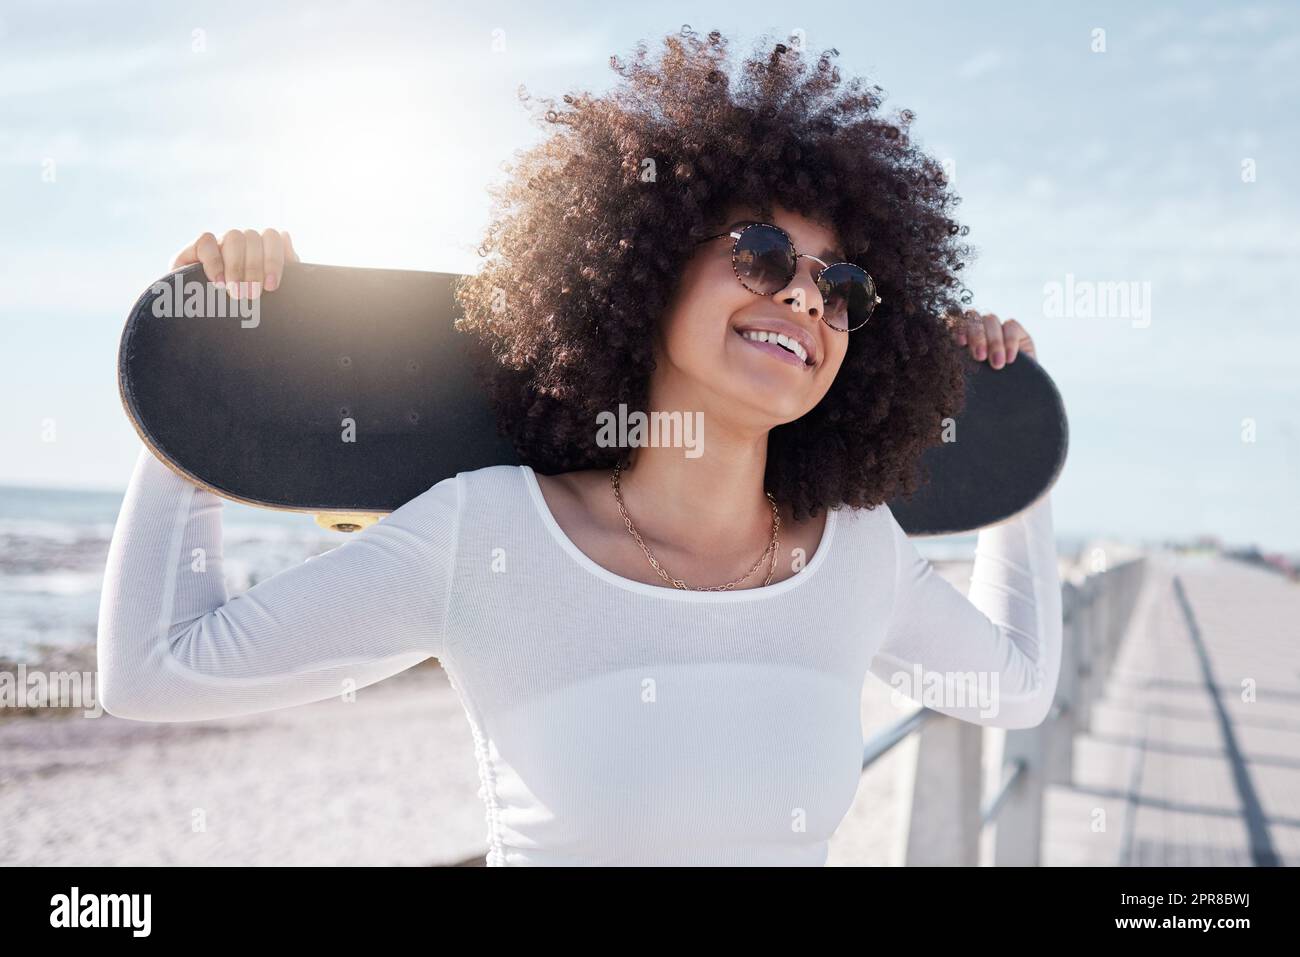 Let the good times roll. a young woman hanging out at the promenade with her skateboard. Stock Photo